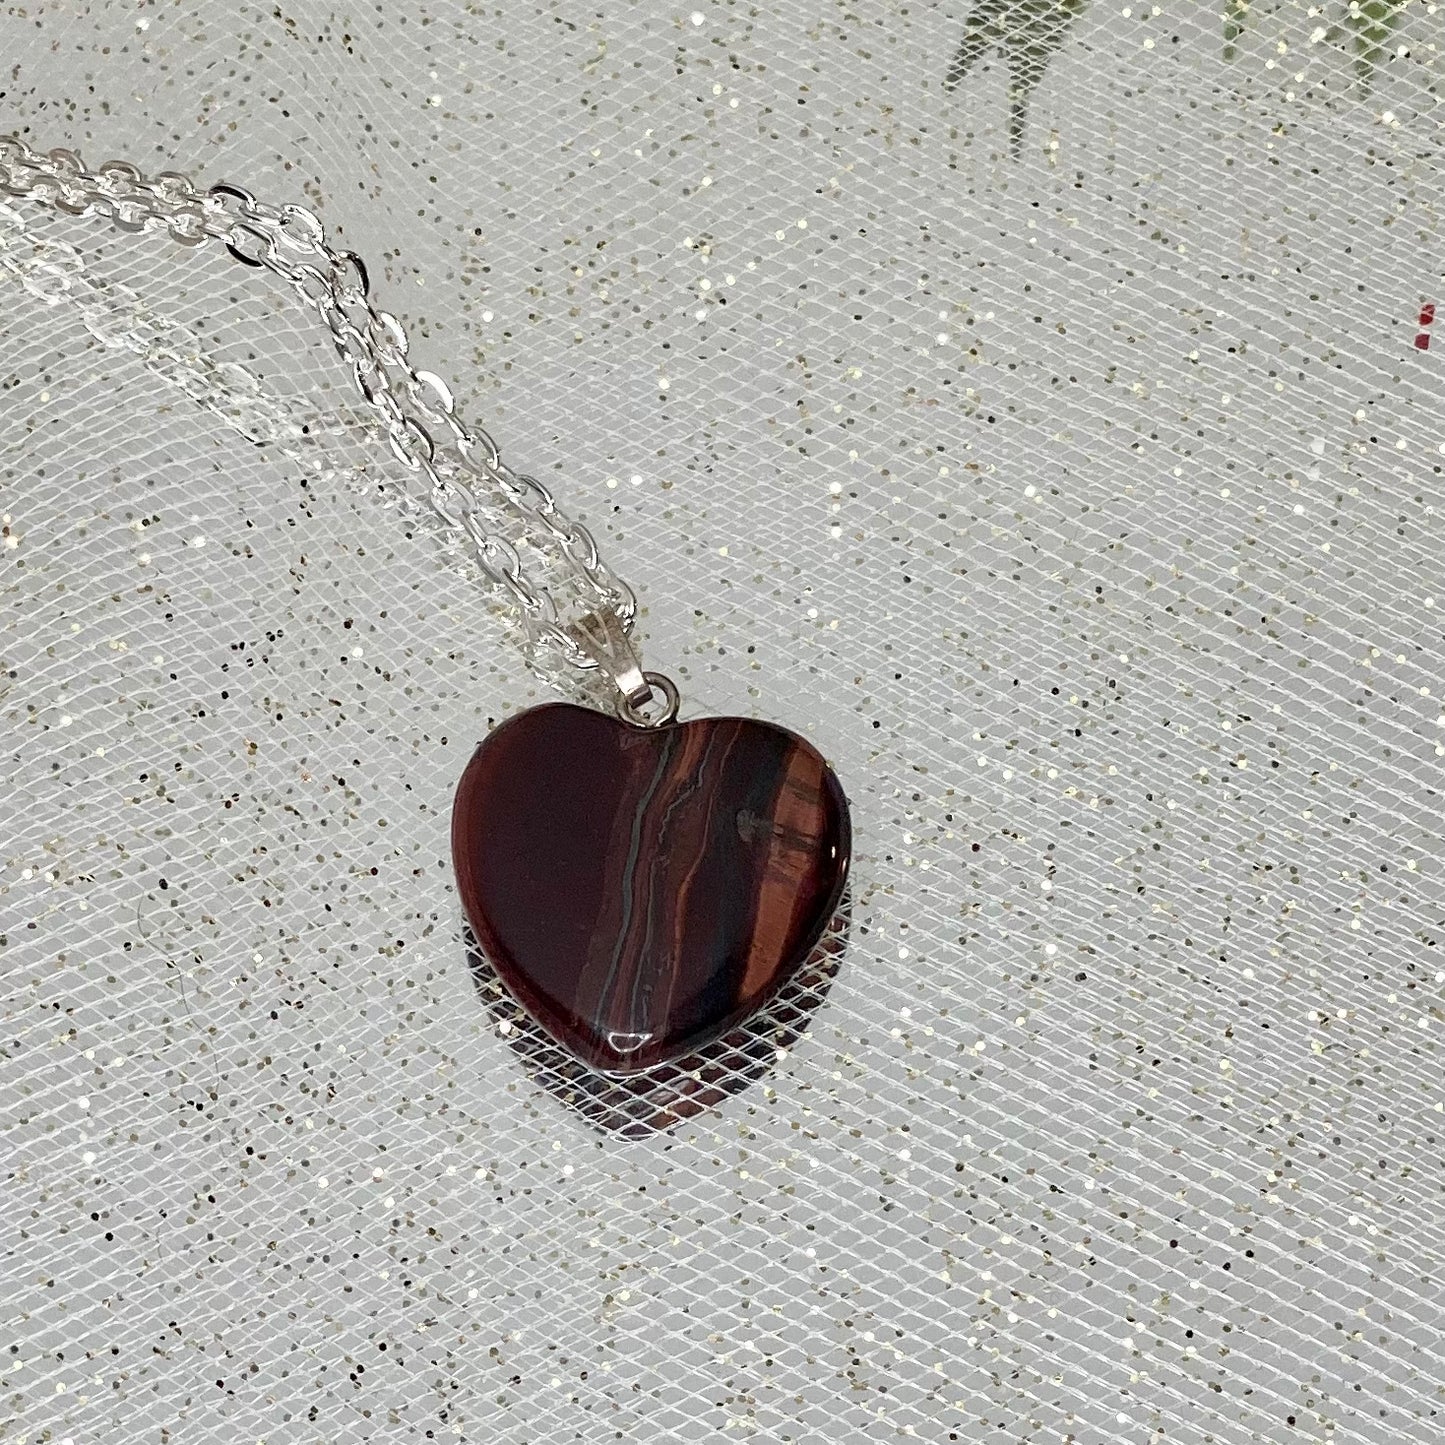 Crystal Heart Harmony Necklace - Crafted for positivity, Adorned for Beauty!